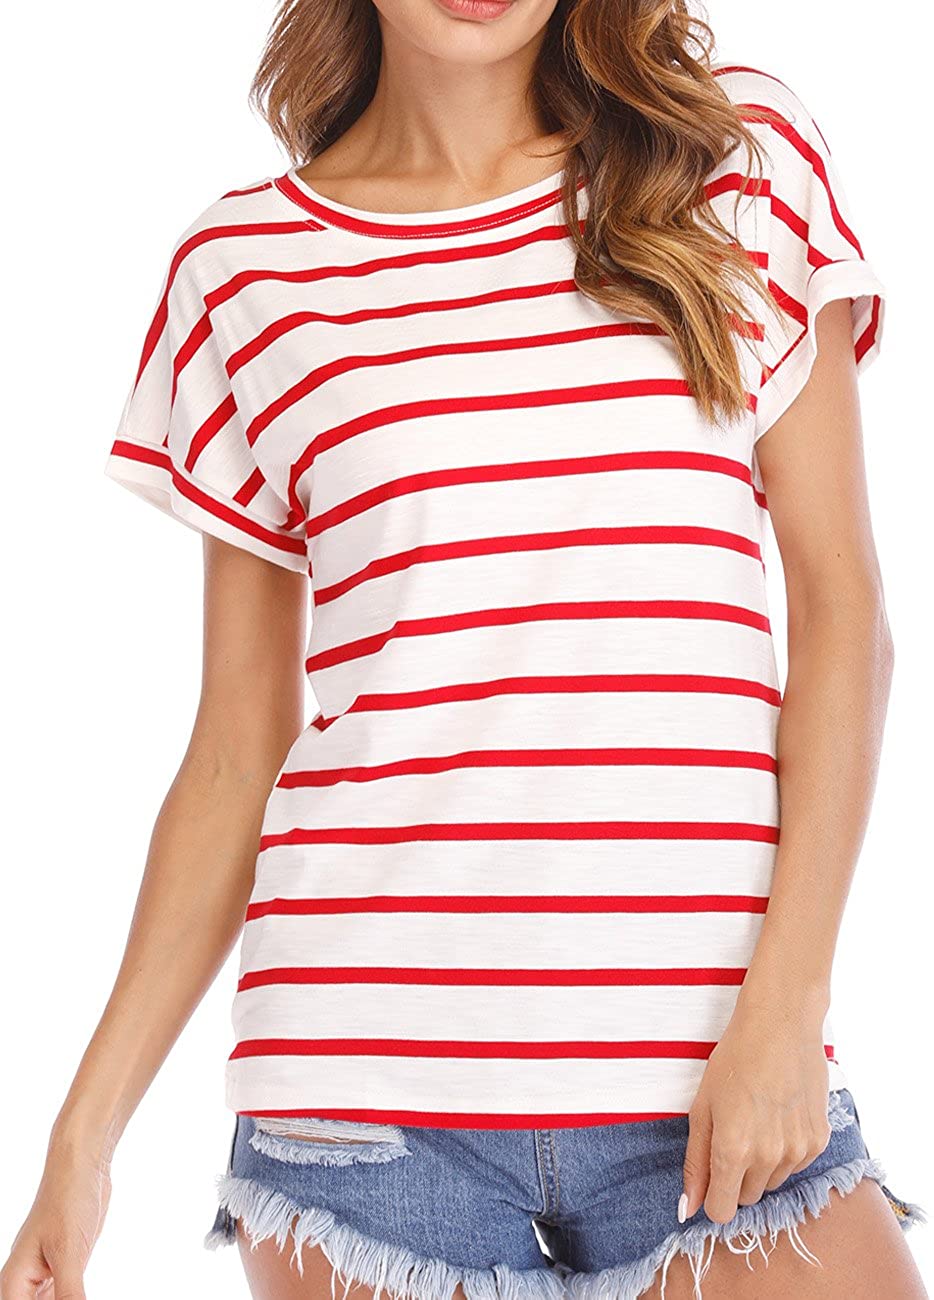 Haola Womens Striped Tops Summer Casual Round Neck Short Sleeve Blouse T-Shirt